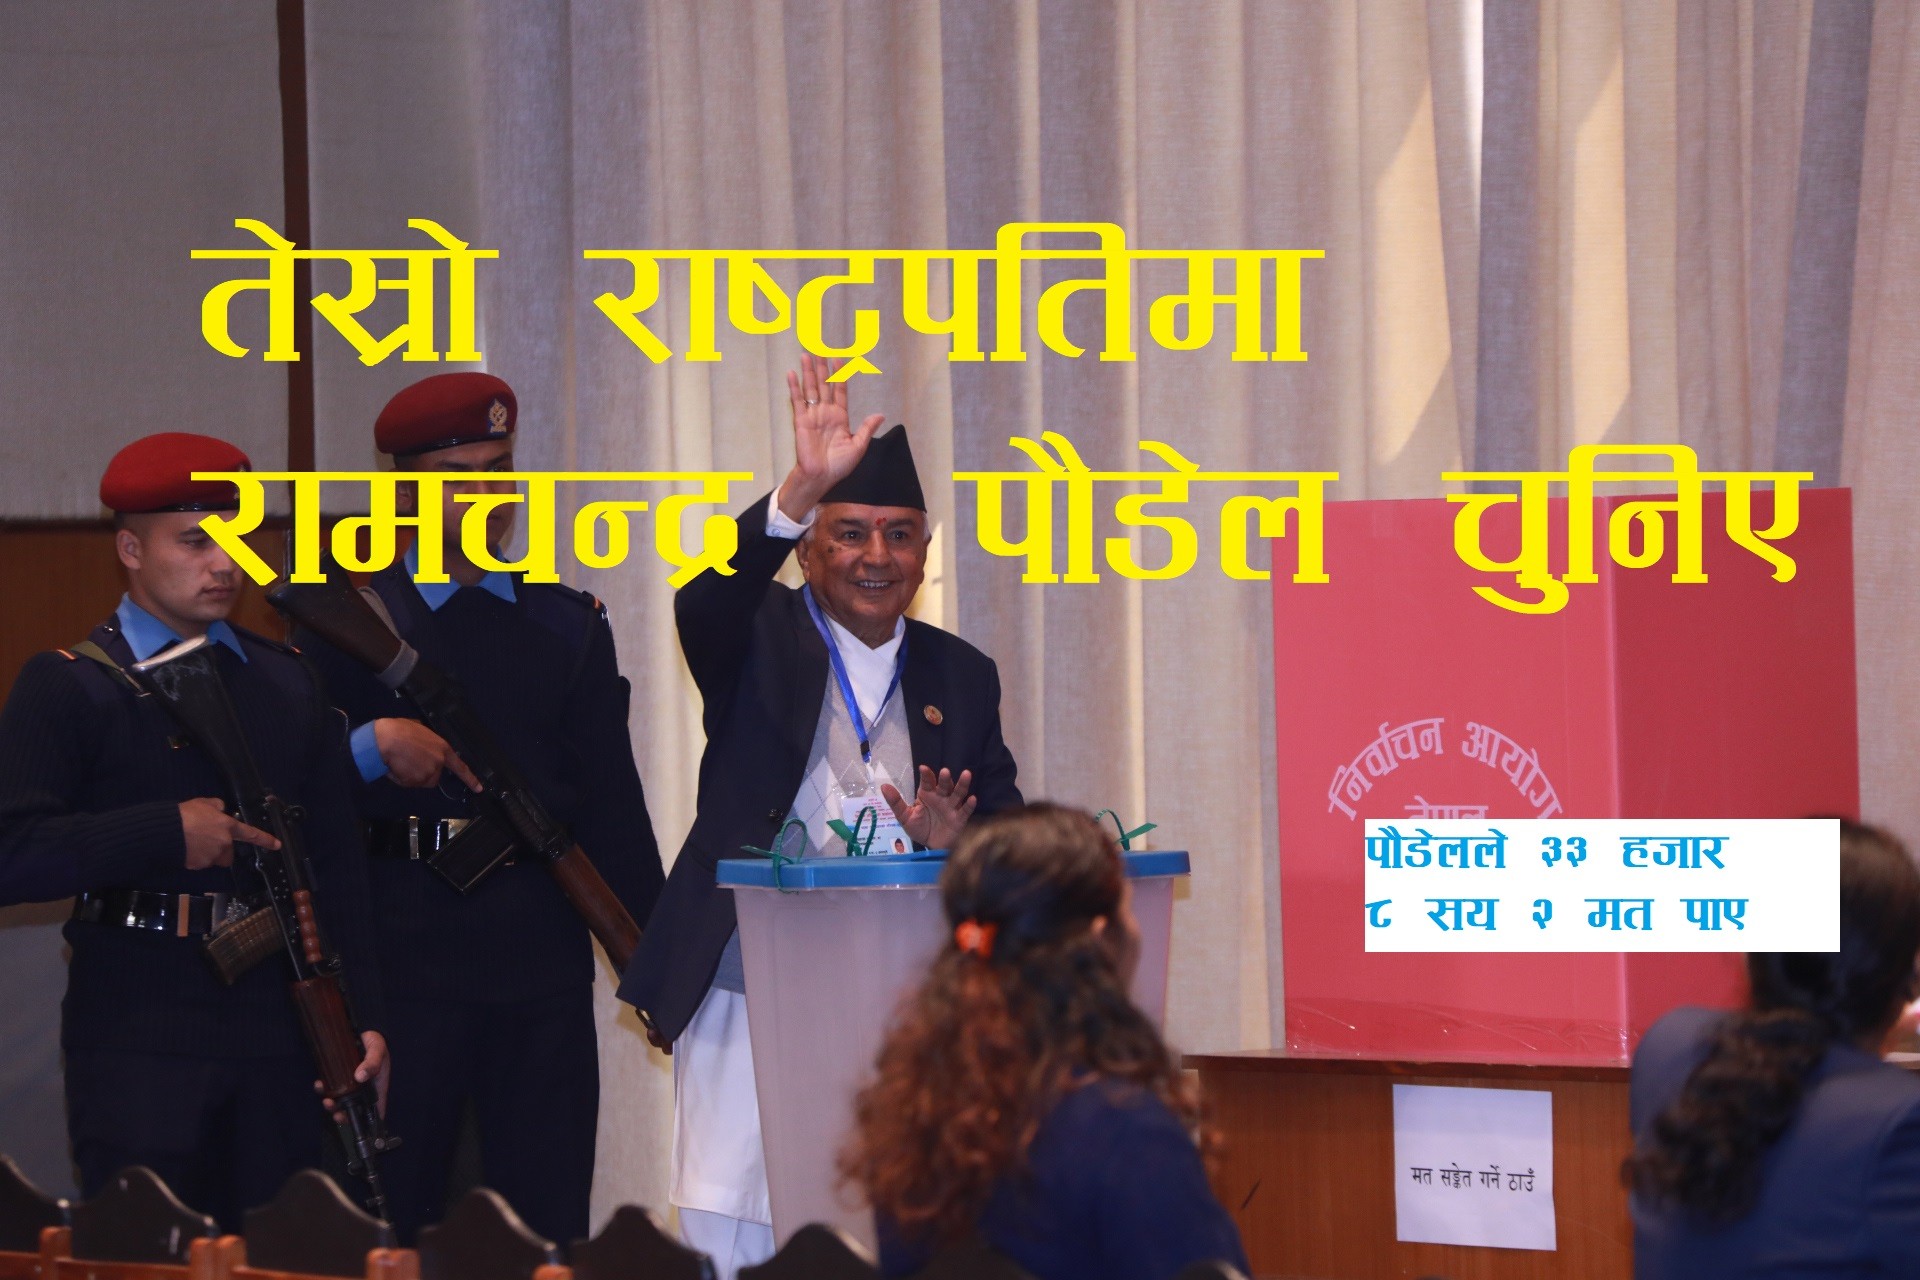 Ramchandra Paudel was elected as the President of Nepal